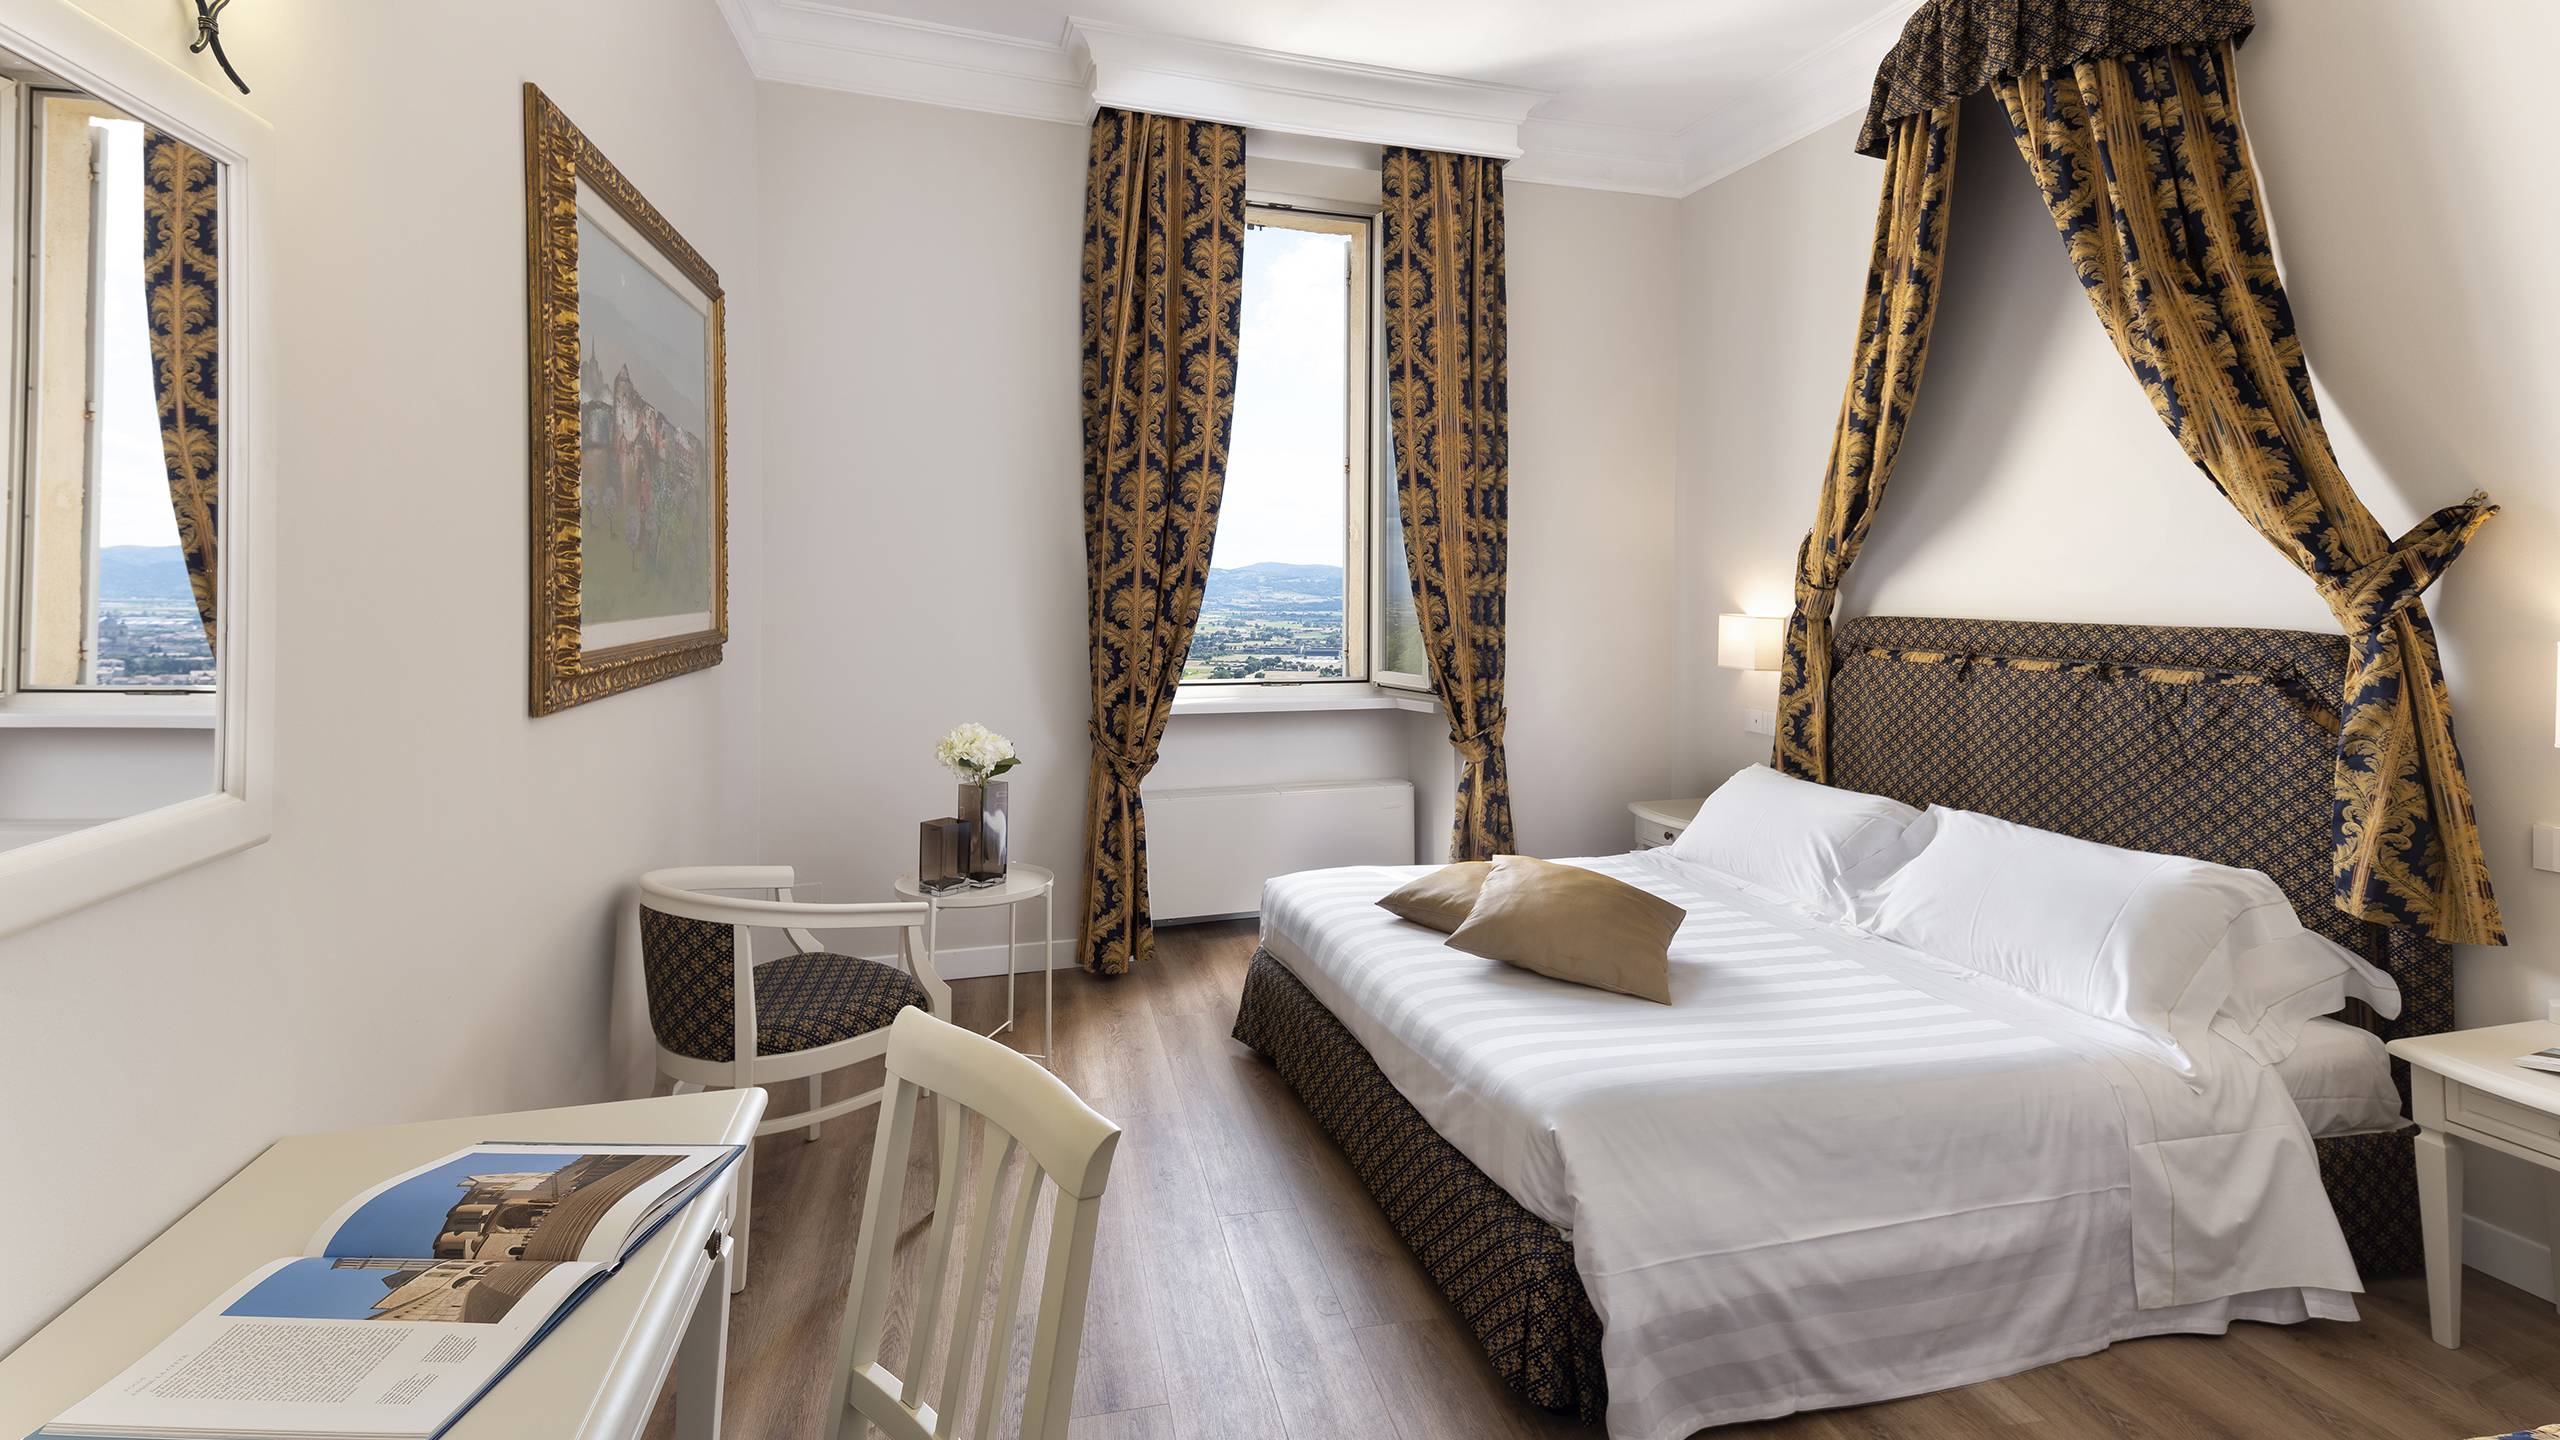 Fontebella-Palace-Hotel-Assisi-suite-507jsvvPPMF7242